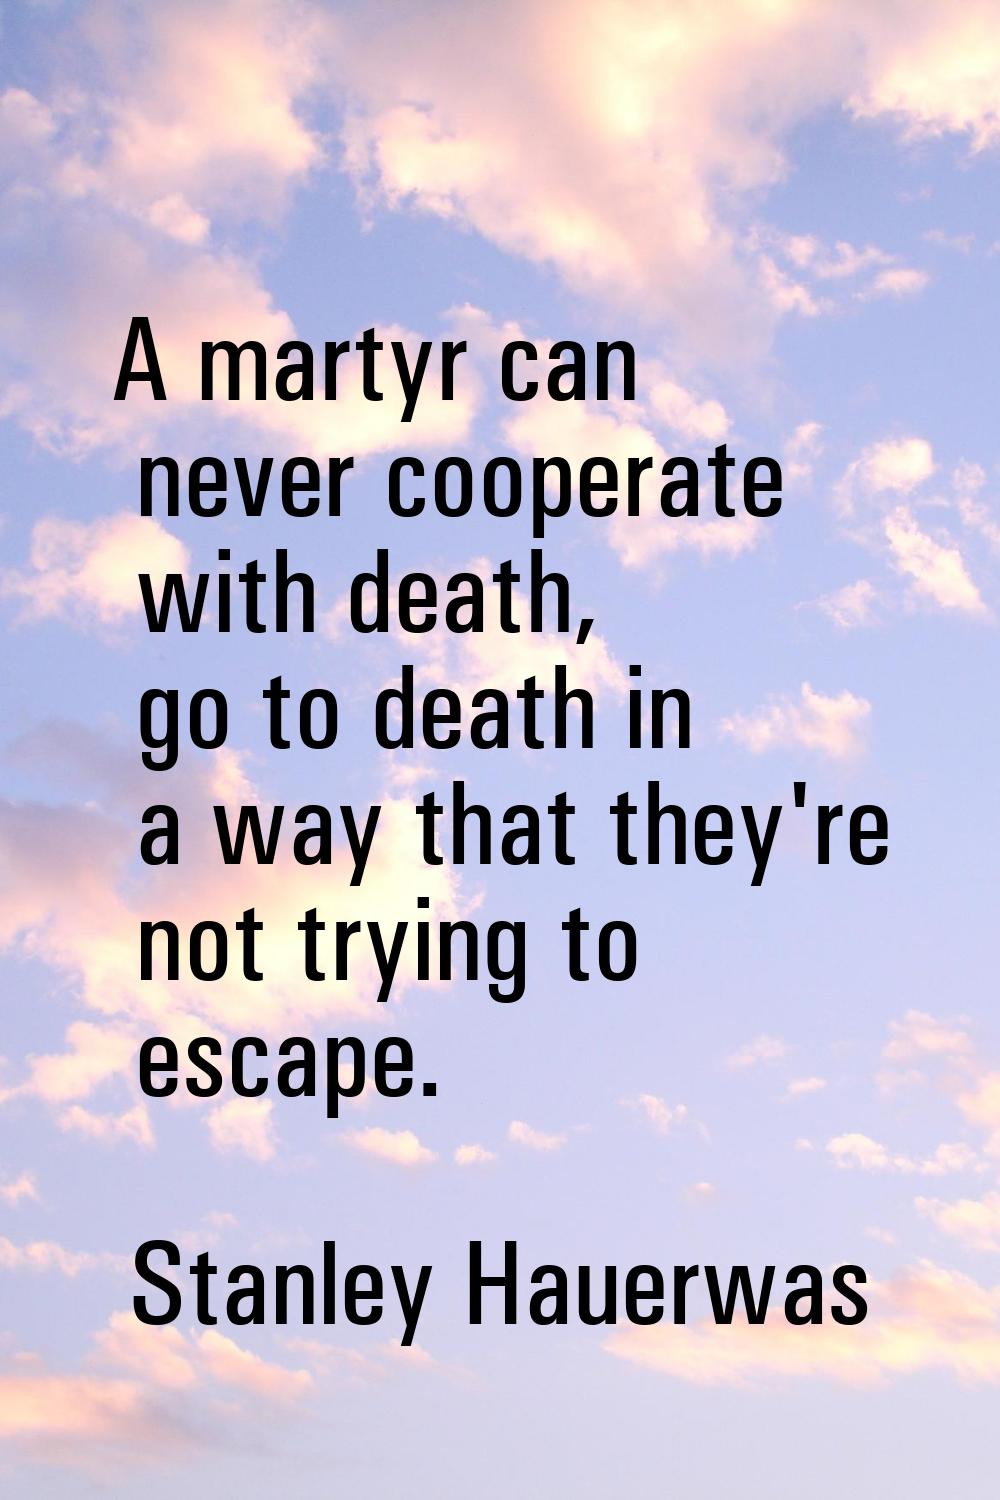 A martyr can never cooperate with death, go to death in a way that they're not trying to escape.